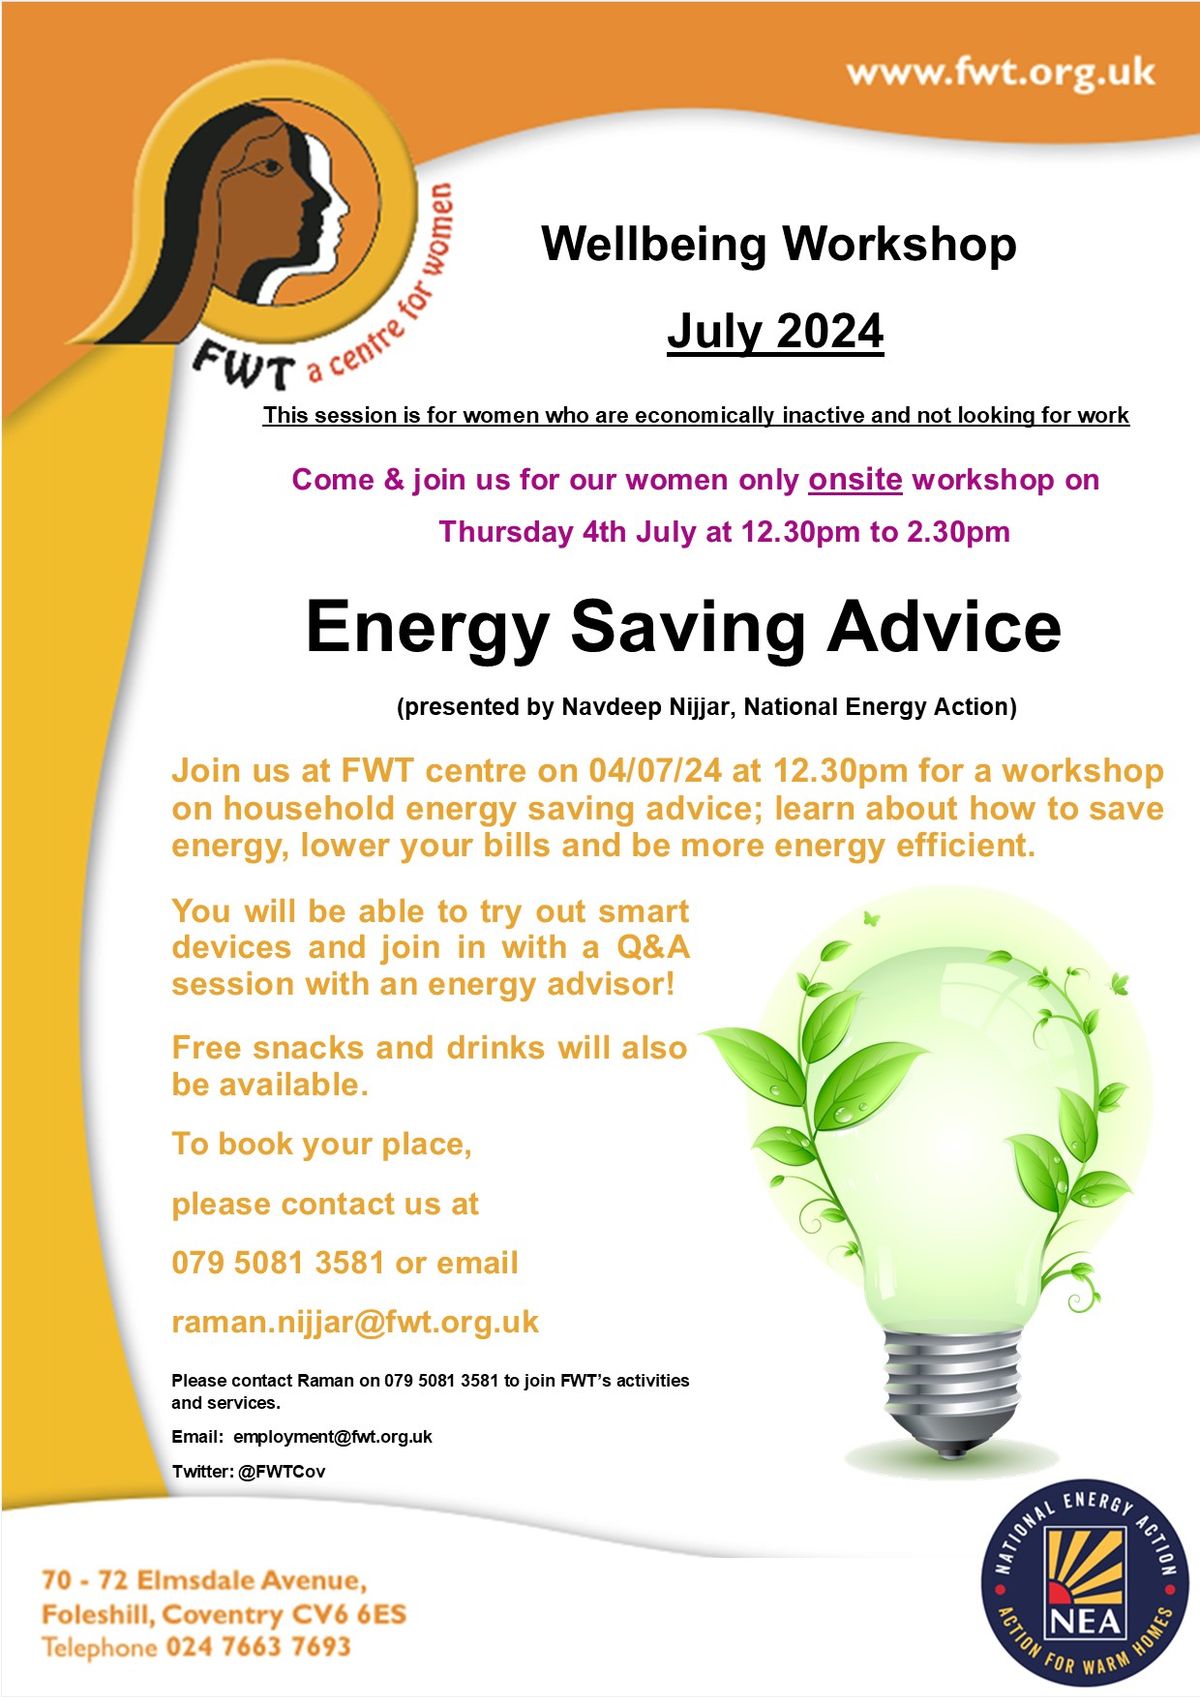 FWT's Energy Advice Wellbeing Workshop